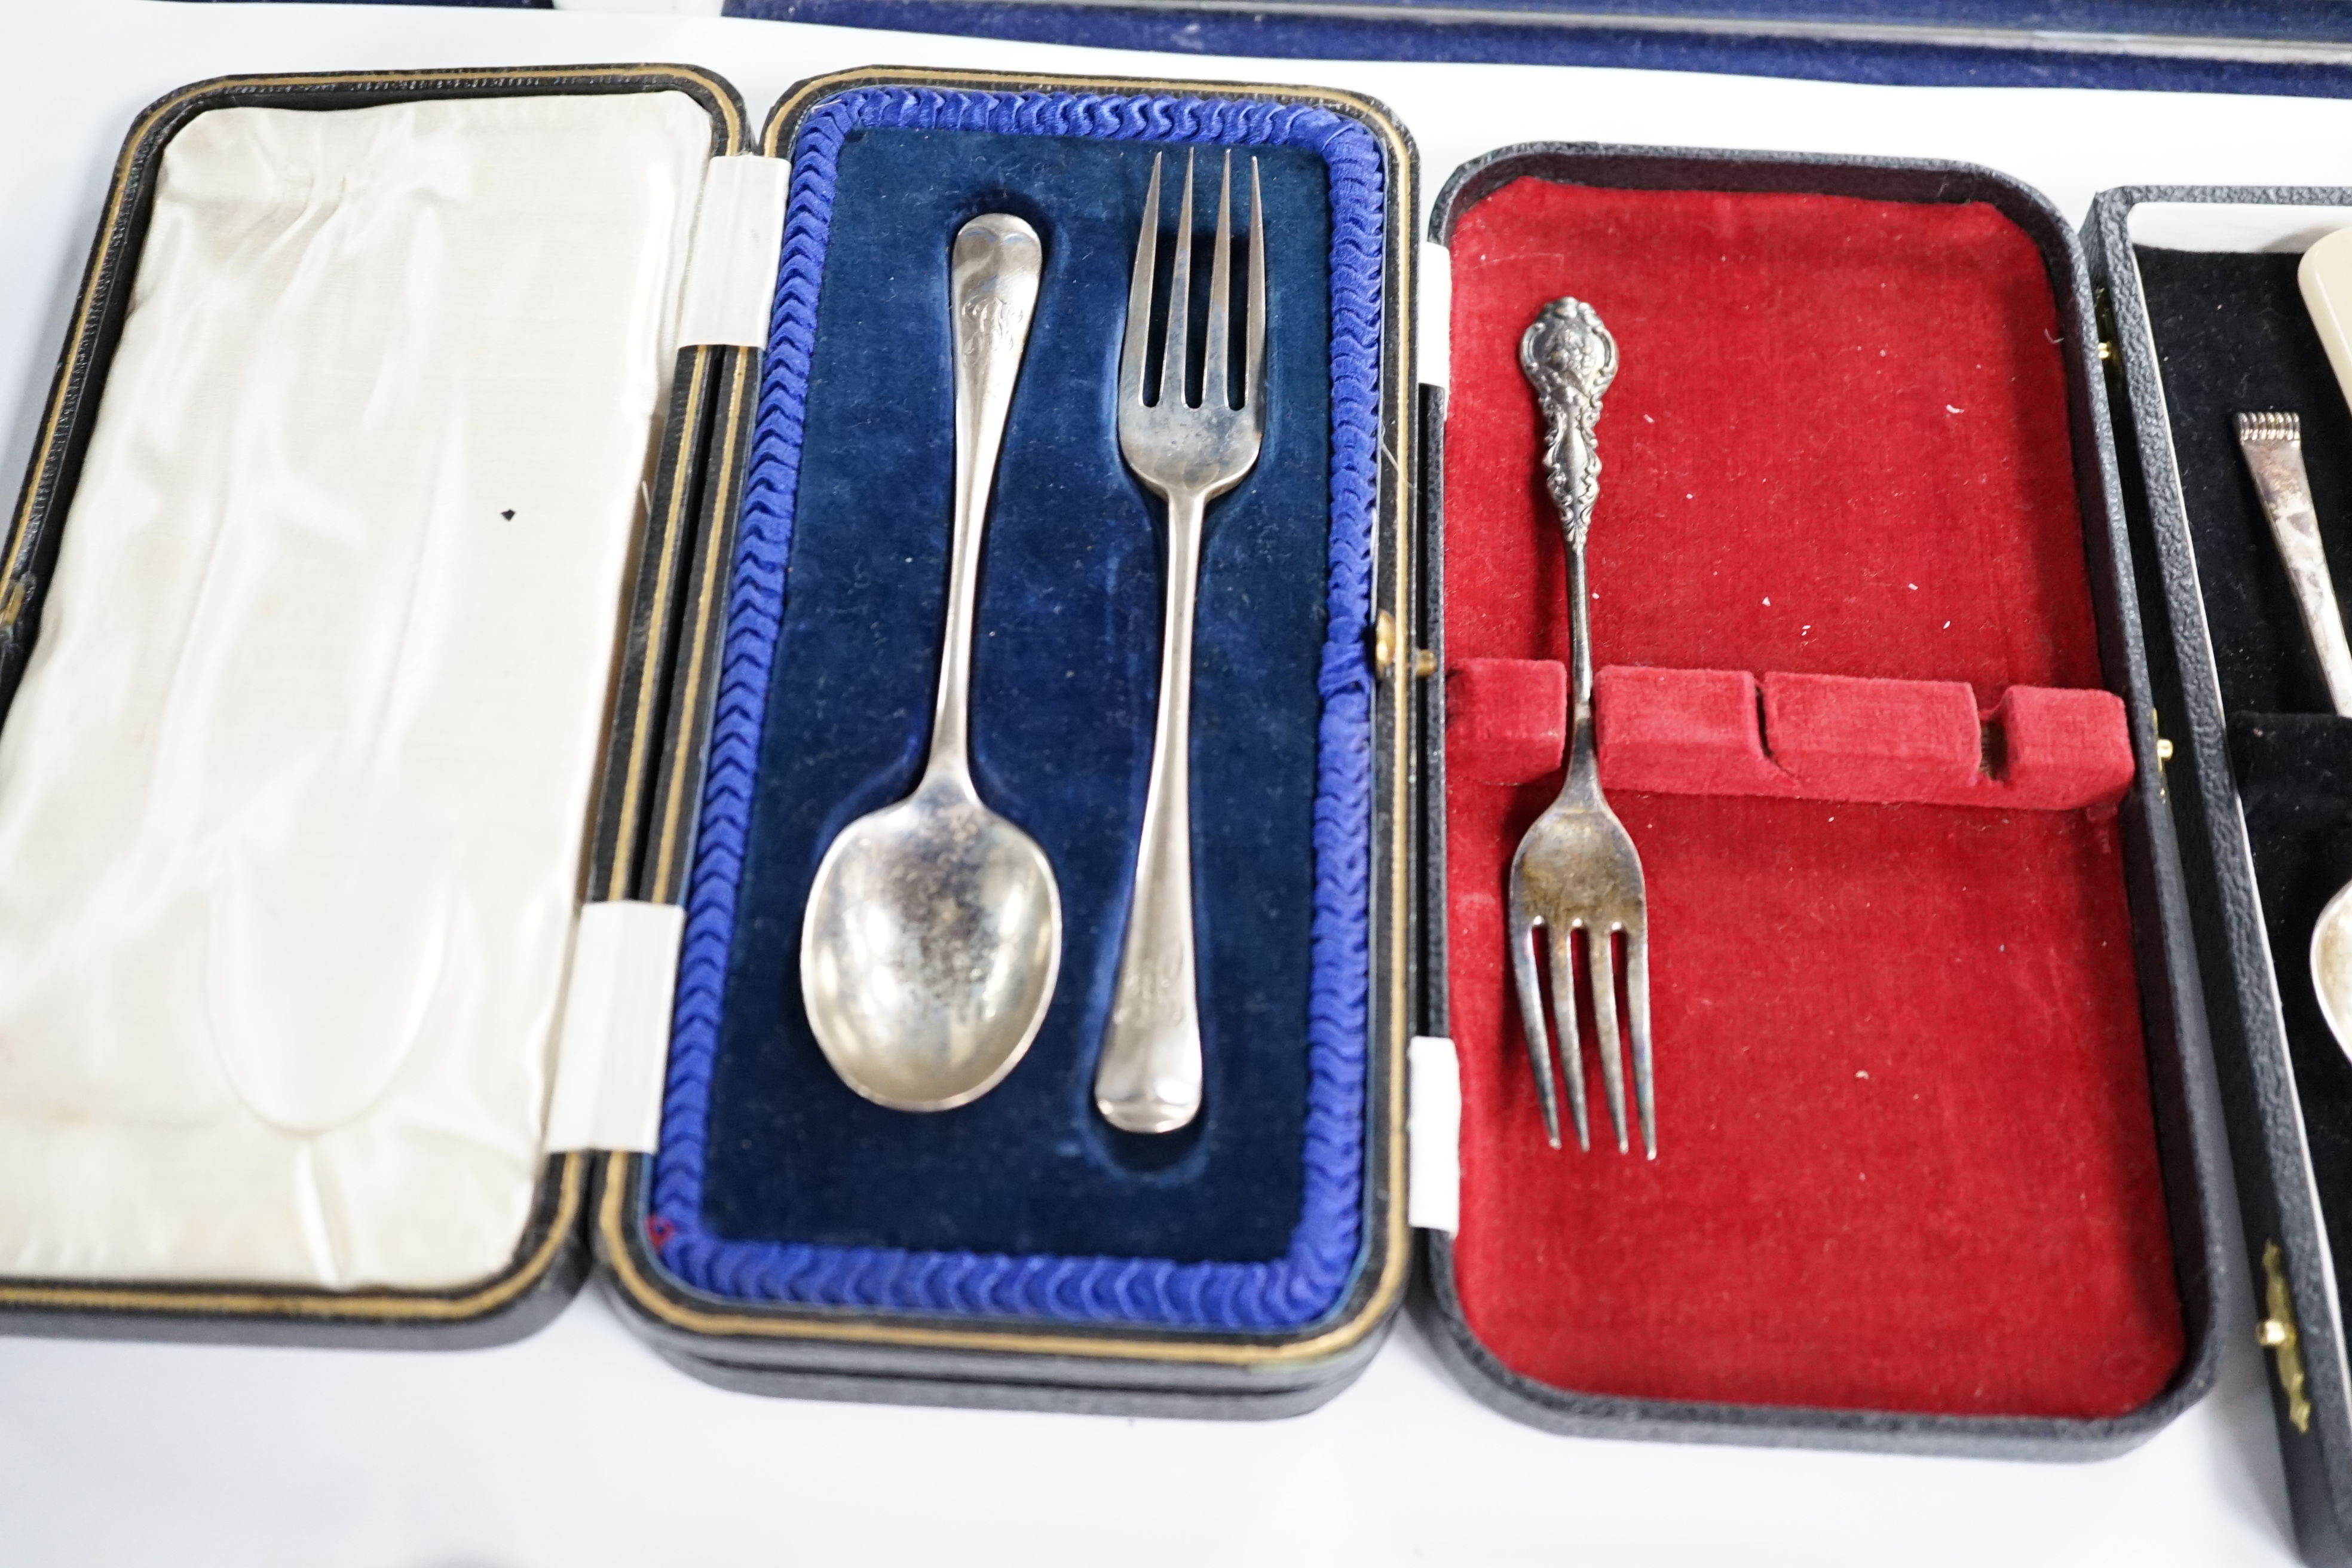 A cased set of six mid 20th century silver teaspoons, a cased silver spoon and pusher, two cased silver christening sets, a boxed silver spoon and one other incomplete cased set. Condition - poor to fair